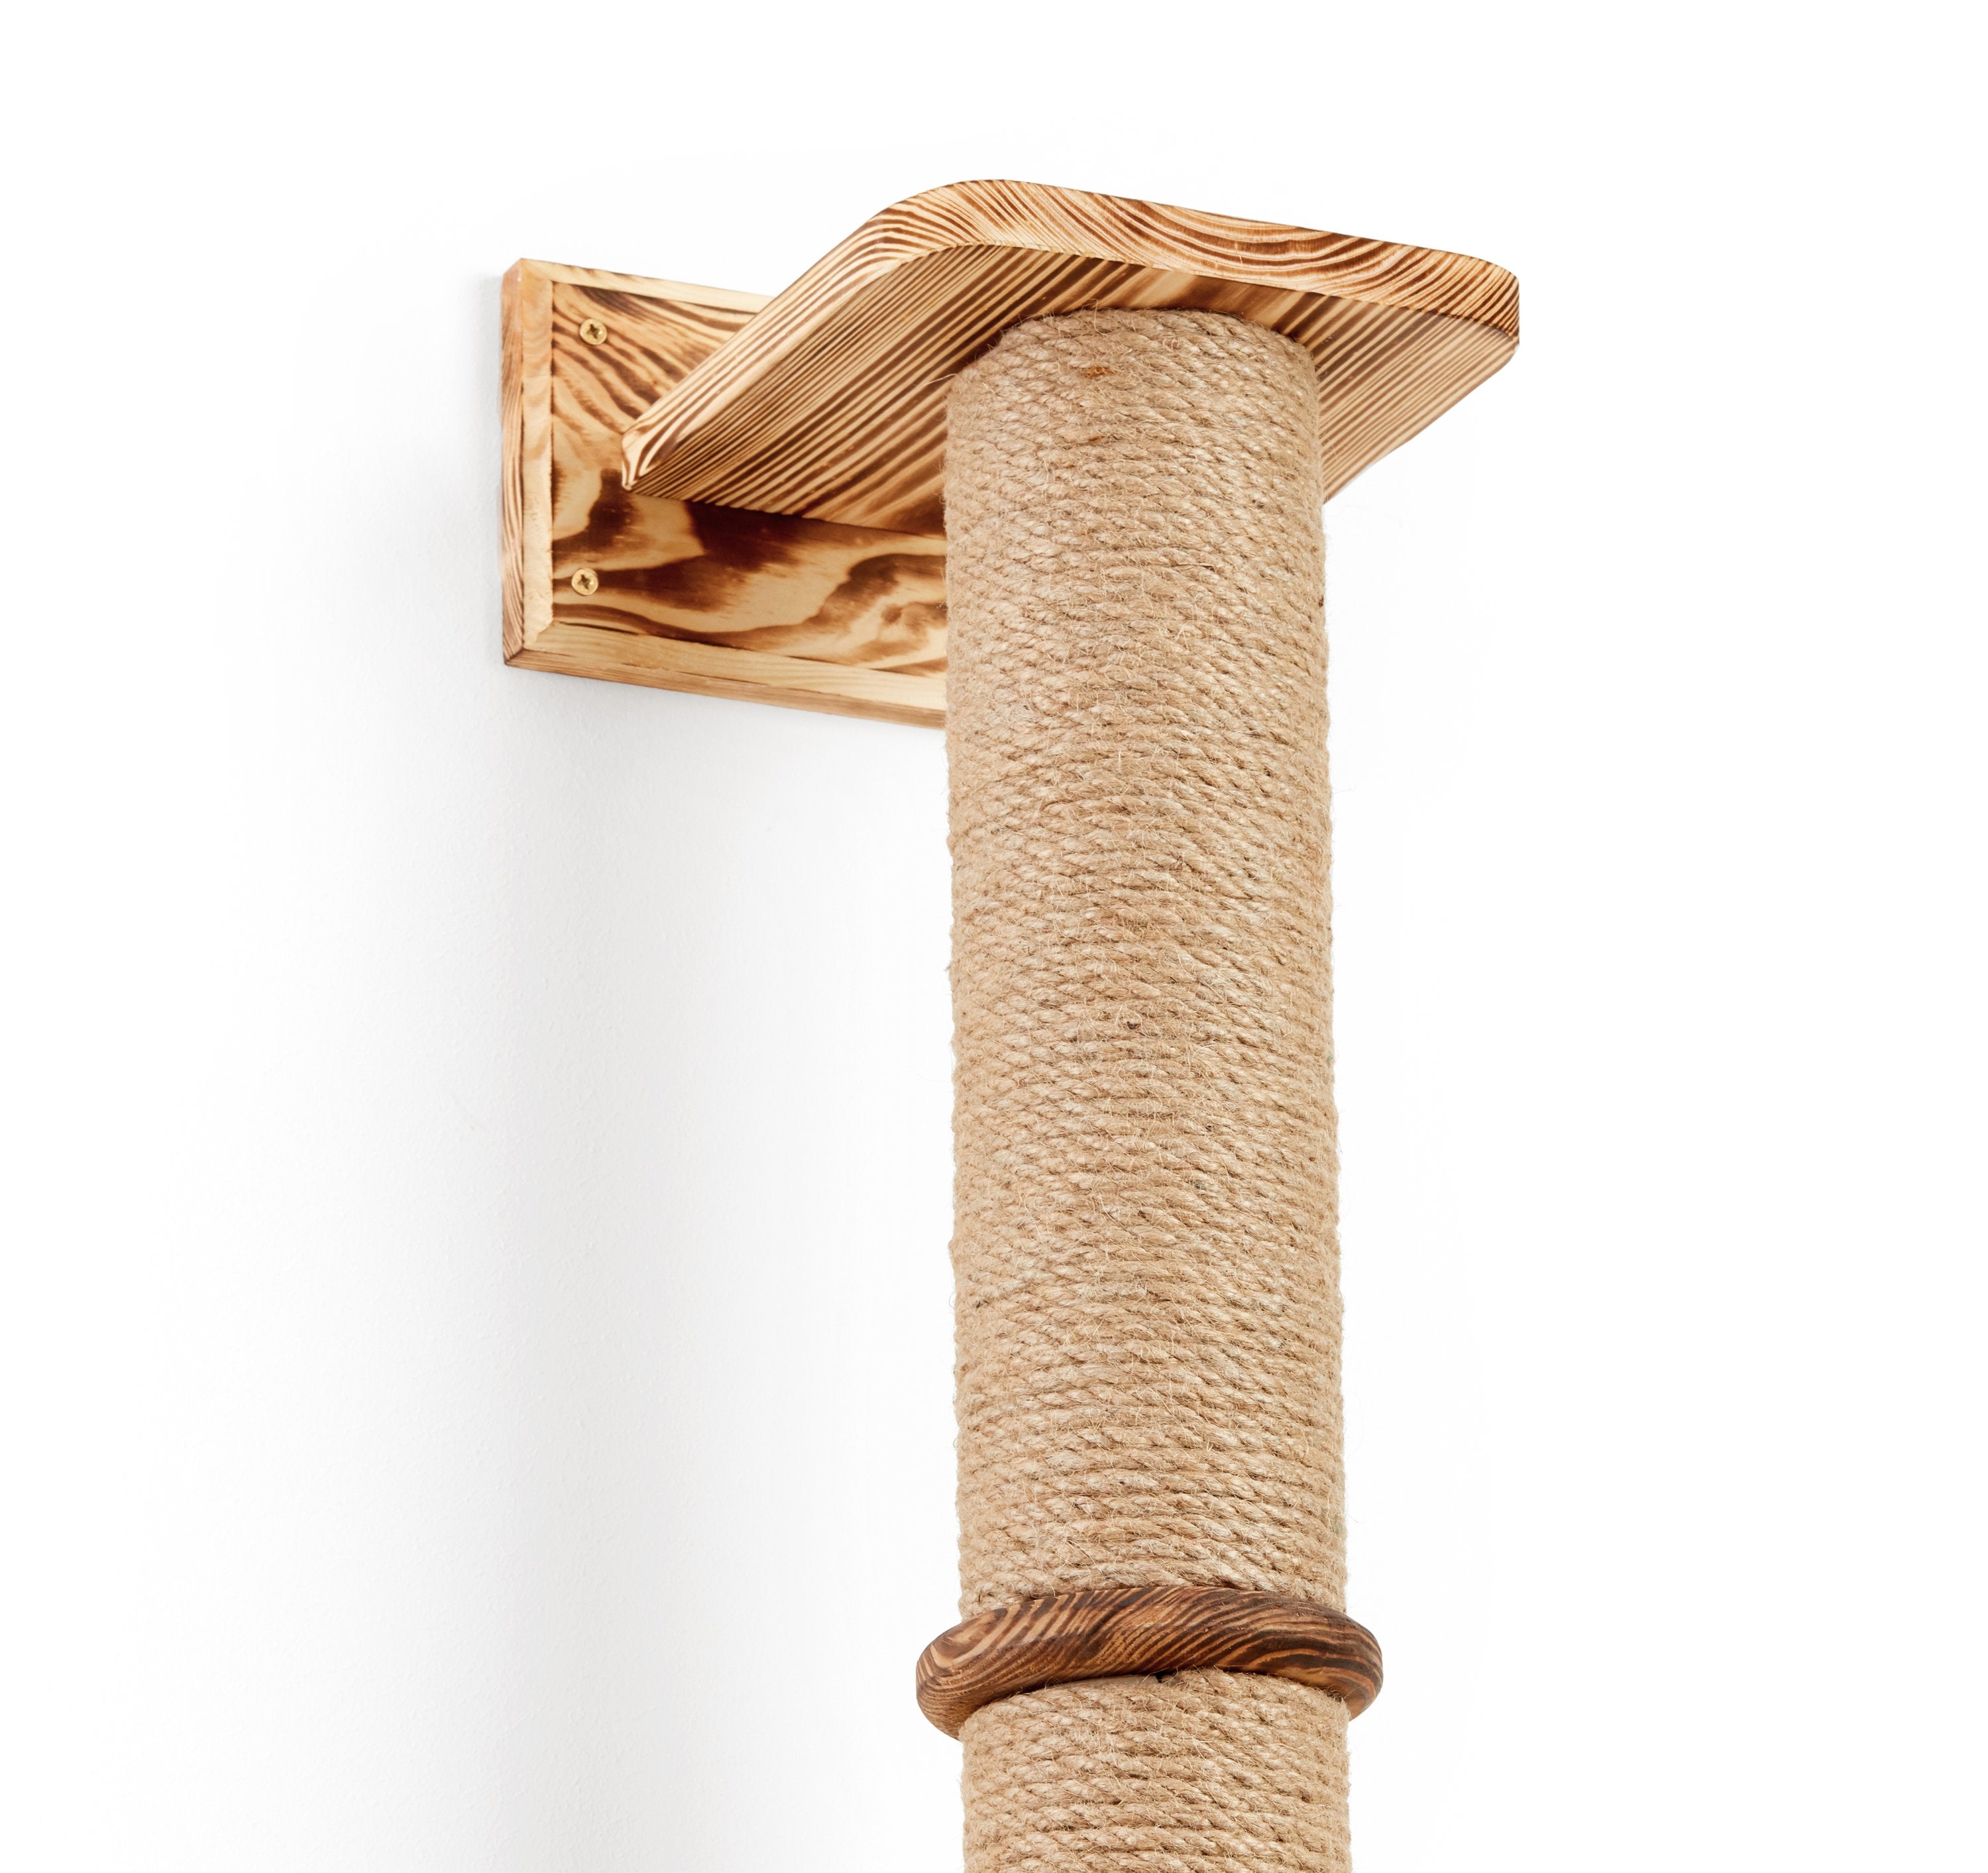 Wall Mounted Cat Sisal Pole - Wooden 2-tier Cat Sisal Climbing Pole - Perfect Addition For Cat Shelves And Other Cat Indoor Furniture